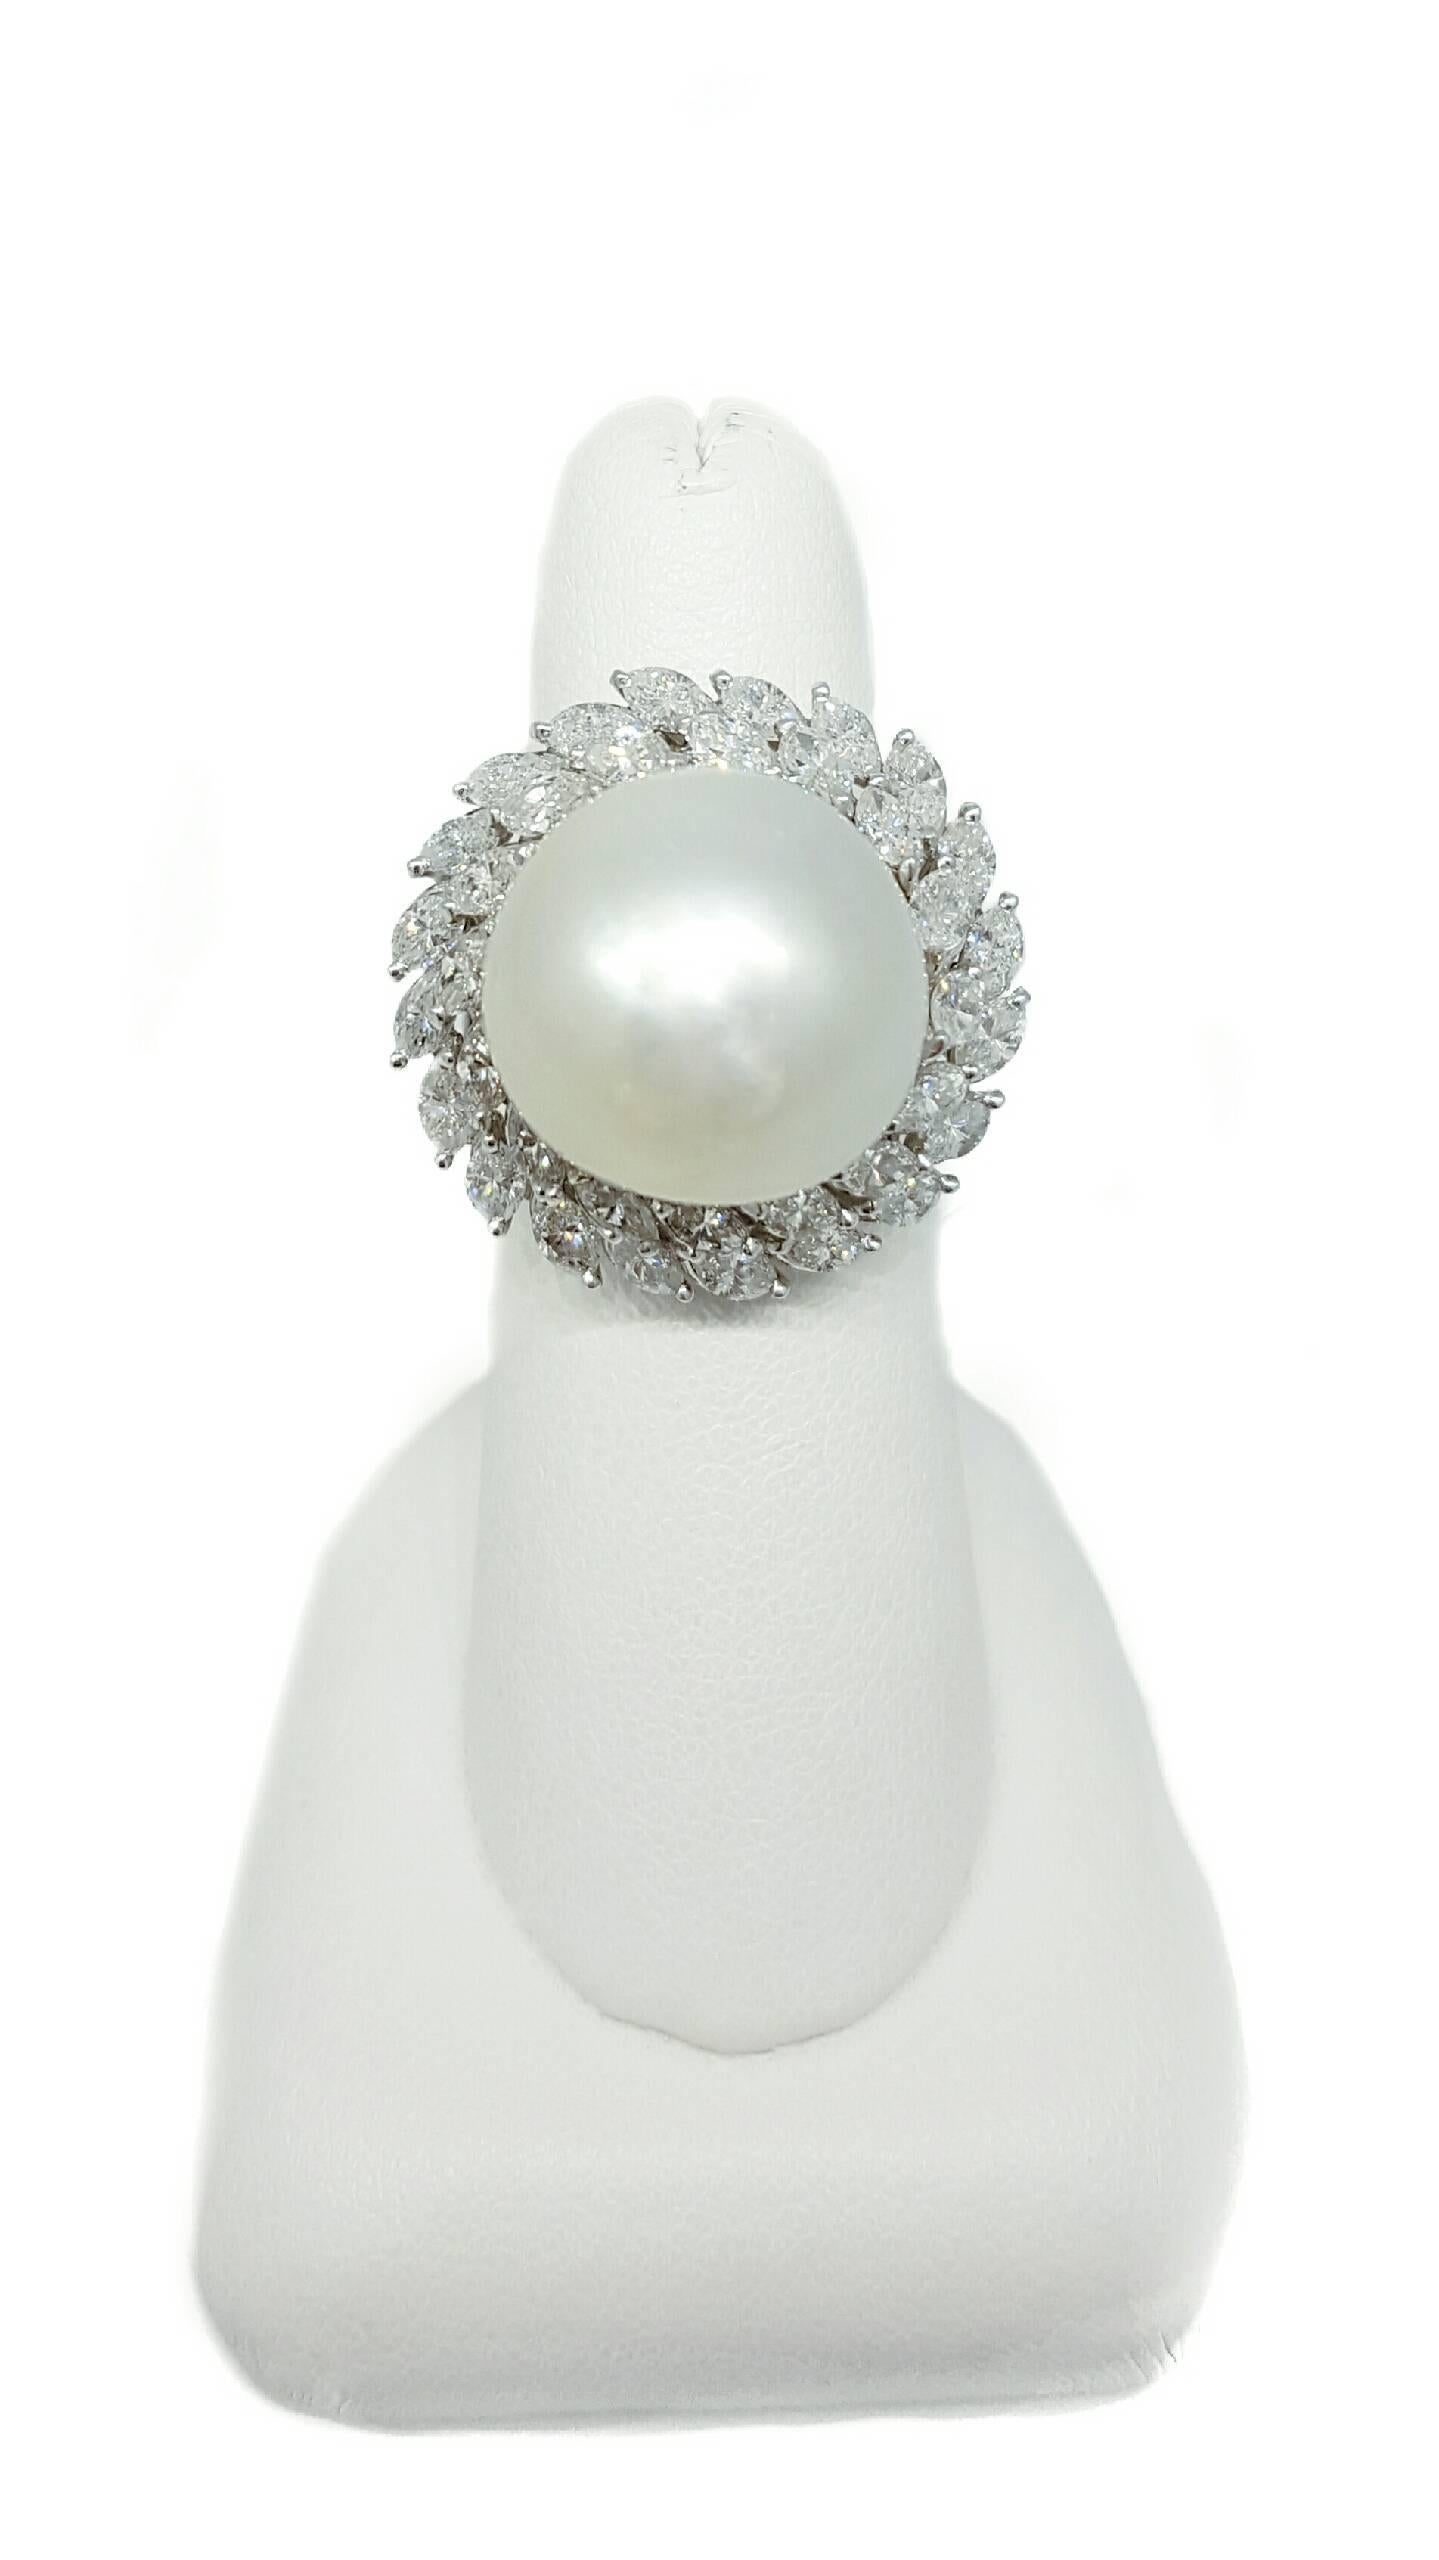 A platinum ring set with a stunning 16.5mm South Sea Pearl and 36 marquise cut diamonds. The diamonds have a total approximate weight of 4.32 carats and are H color, VS2 to SI1 clarity. The ring is a split shank design made in platinum and weighs